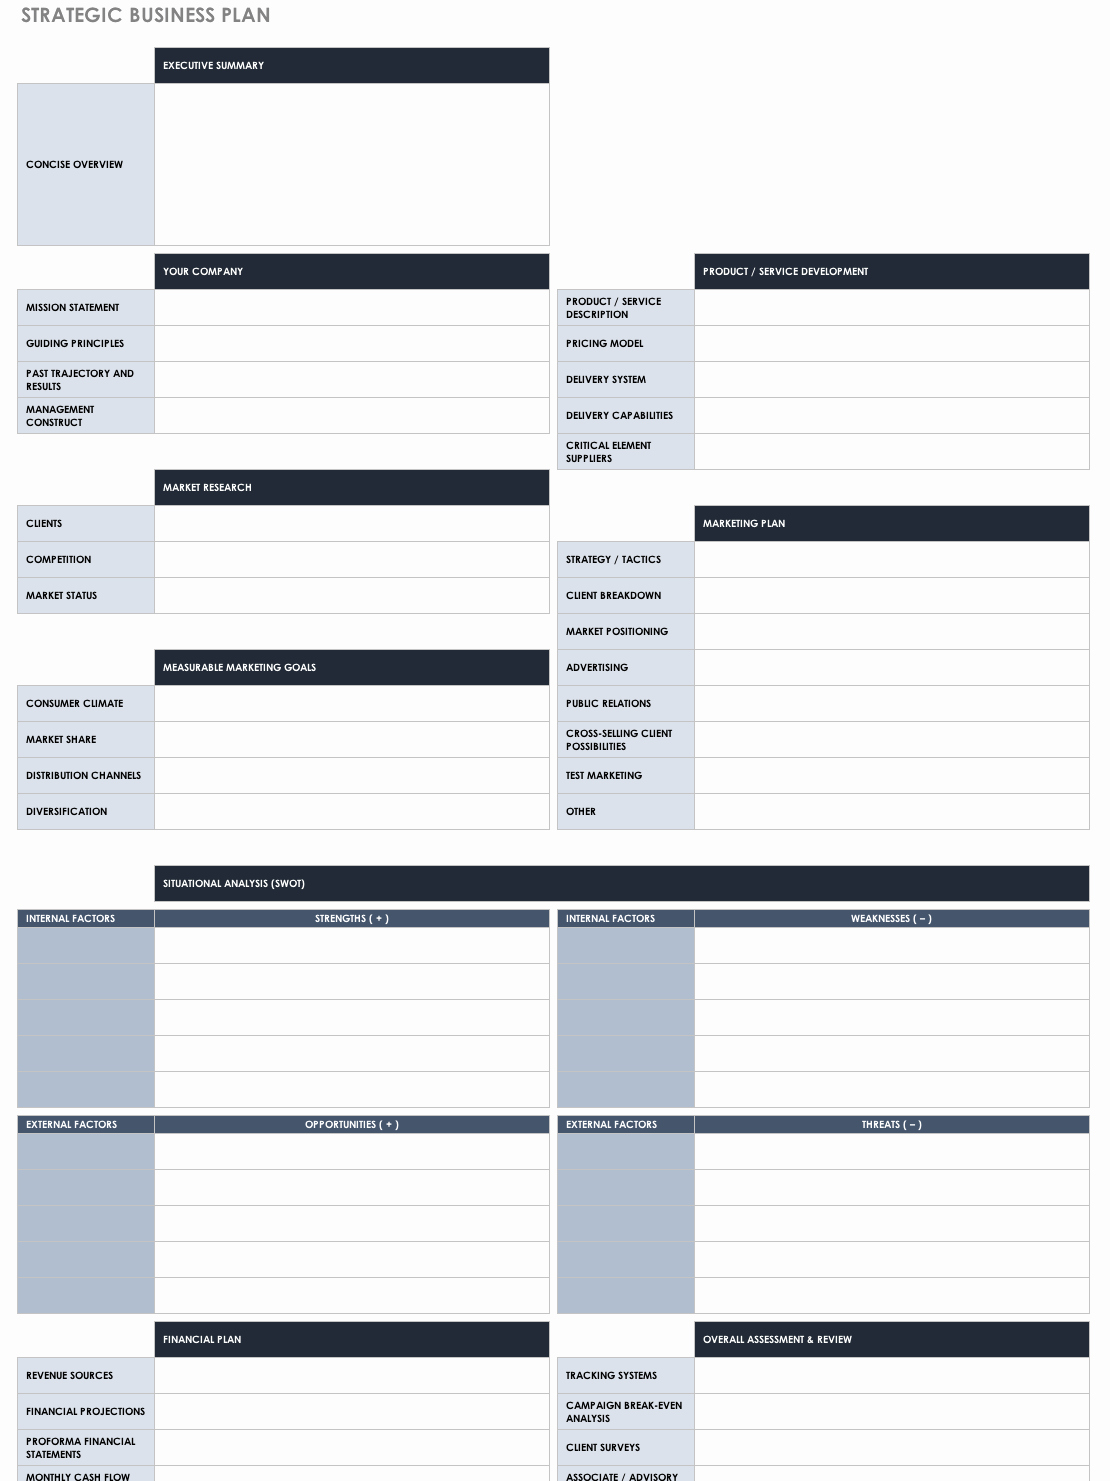 Strategic Account Plan Template Lovely Free Strategic Planning Templates